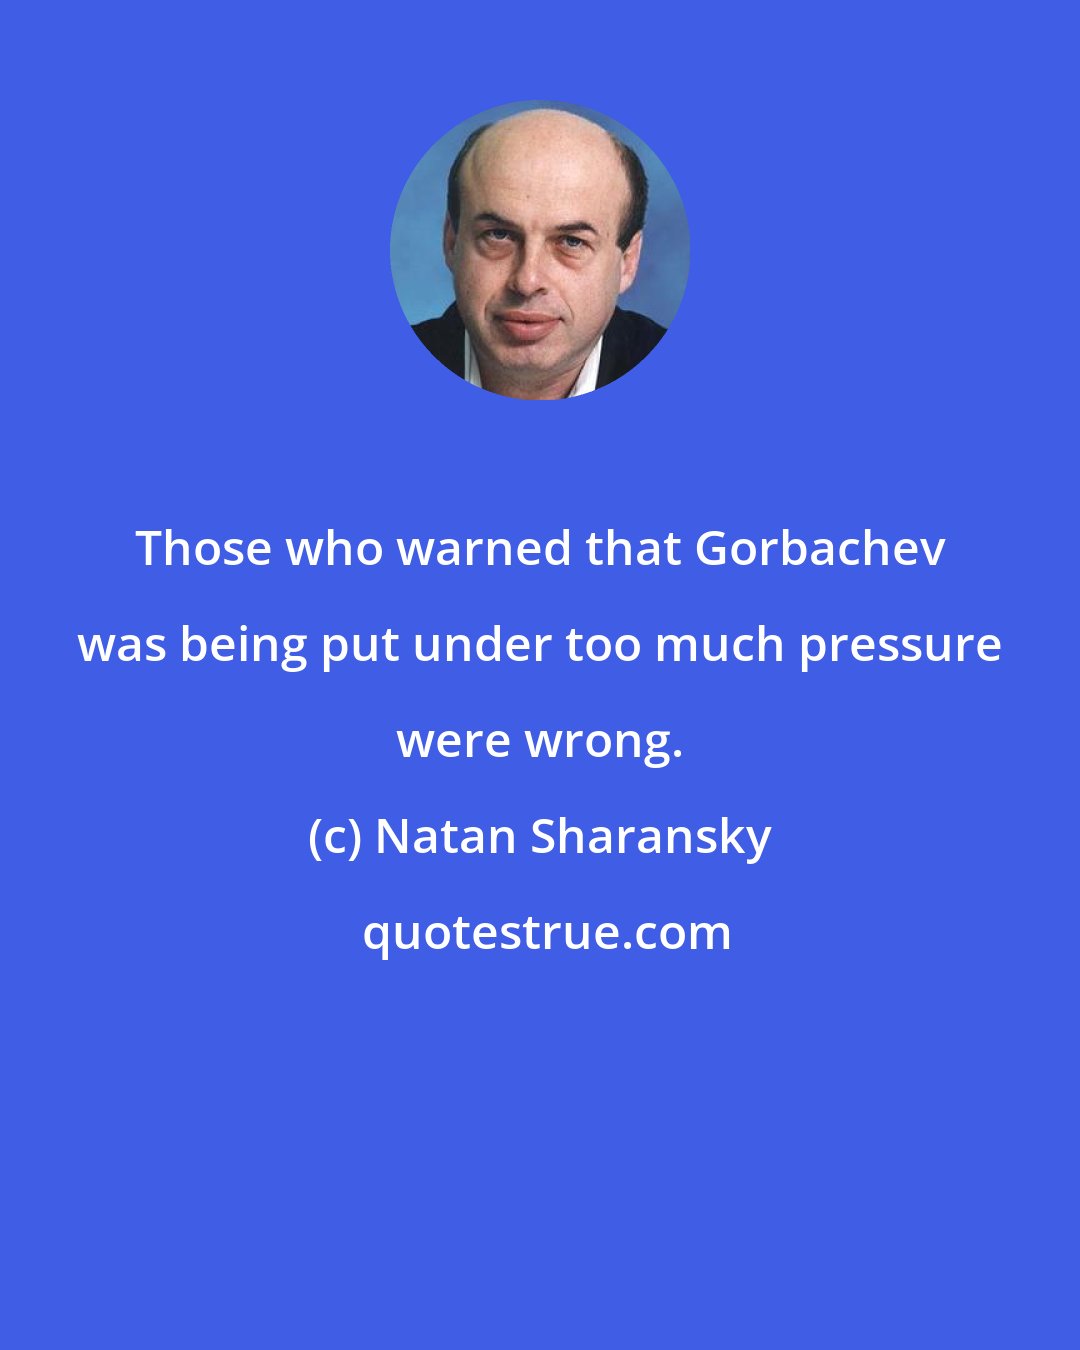 Natan Sharansky: Those who warned that Gorbachev was being put under too much pressure were wrong.